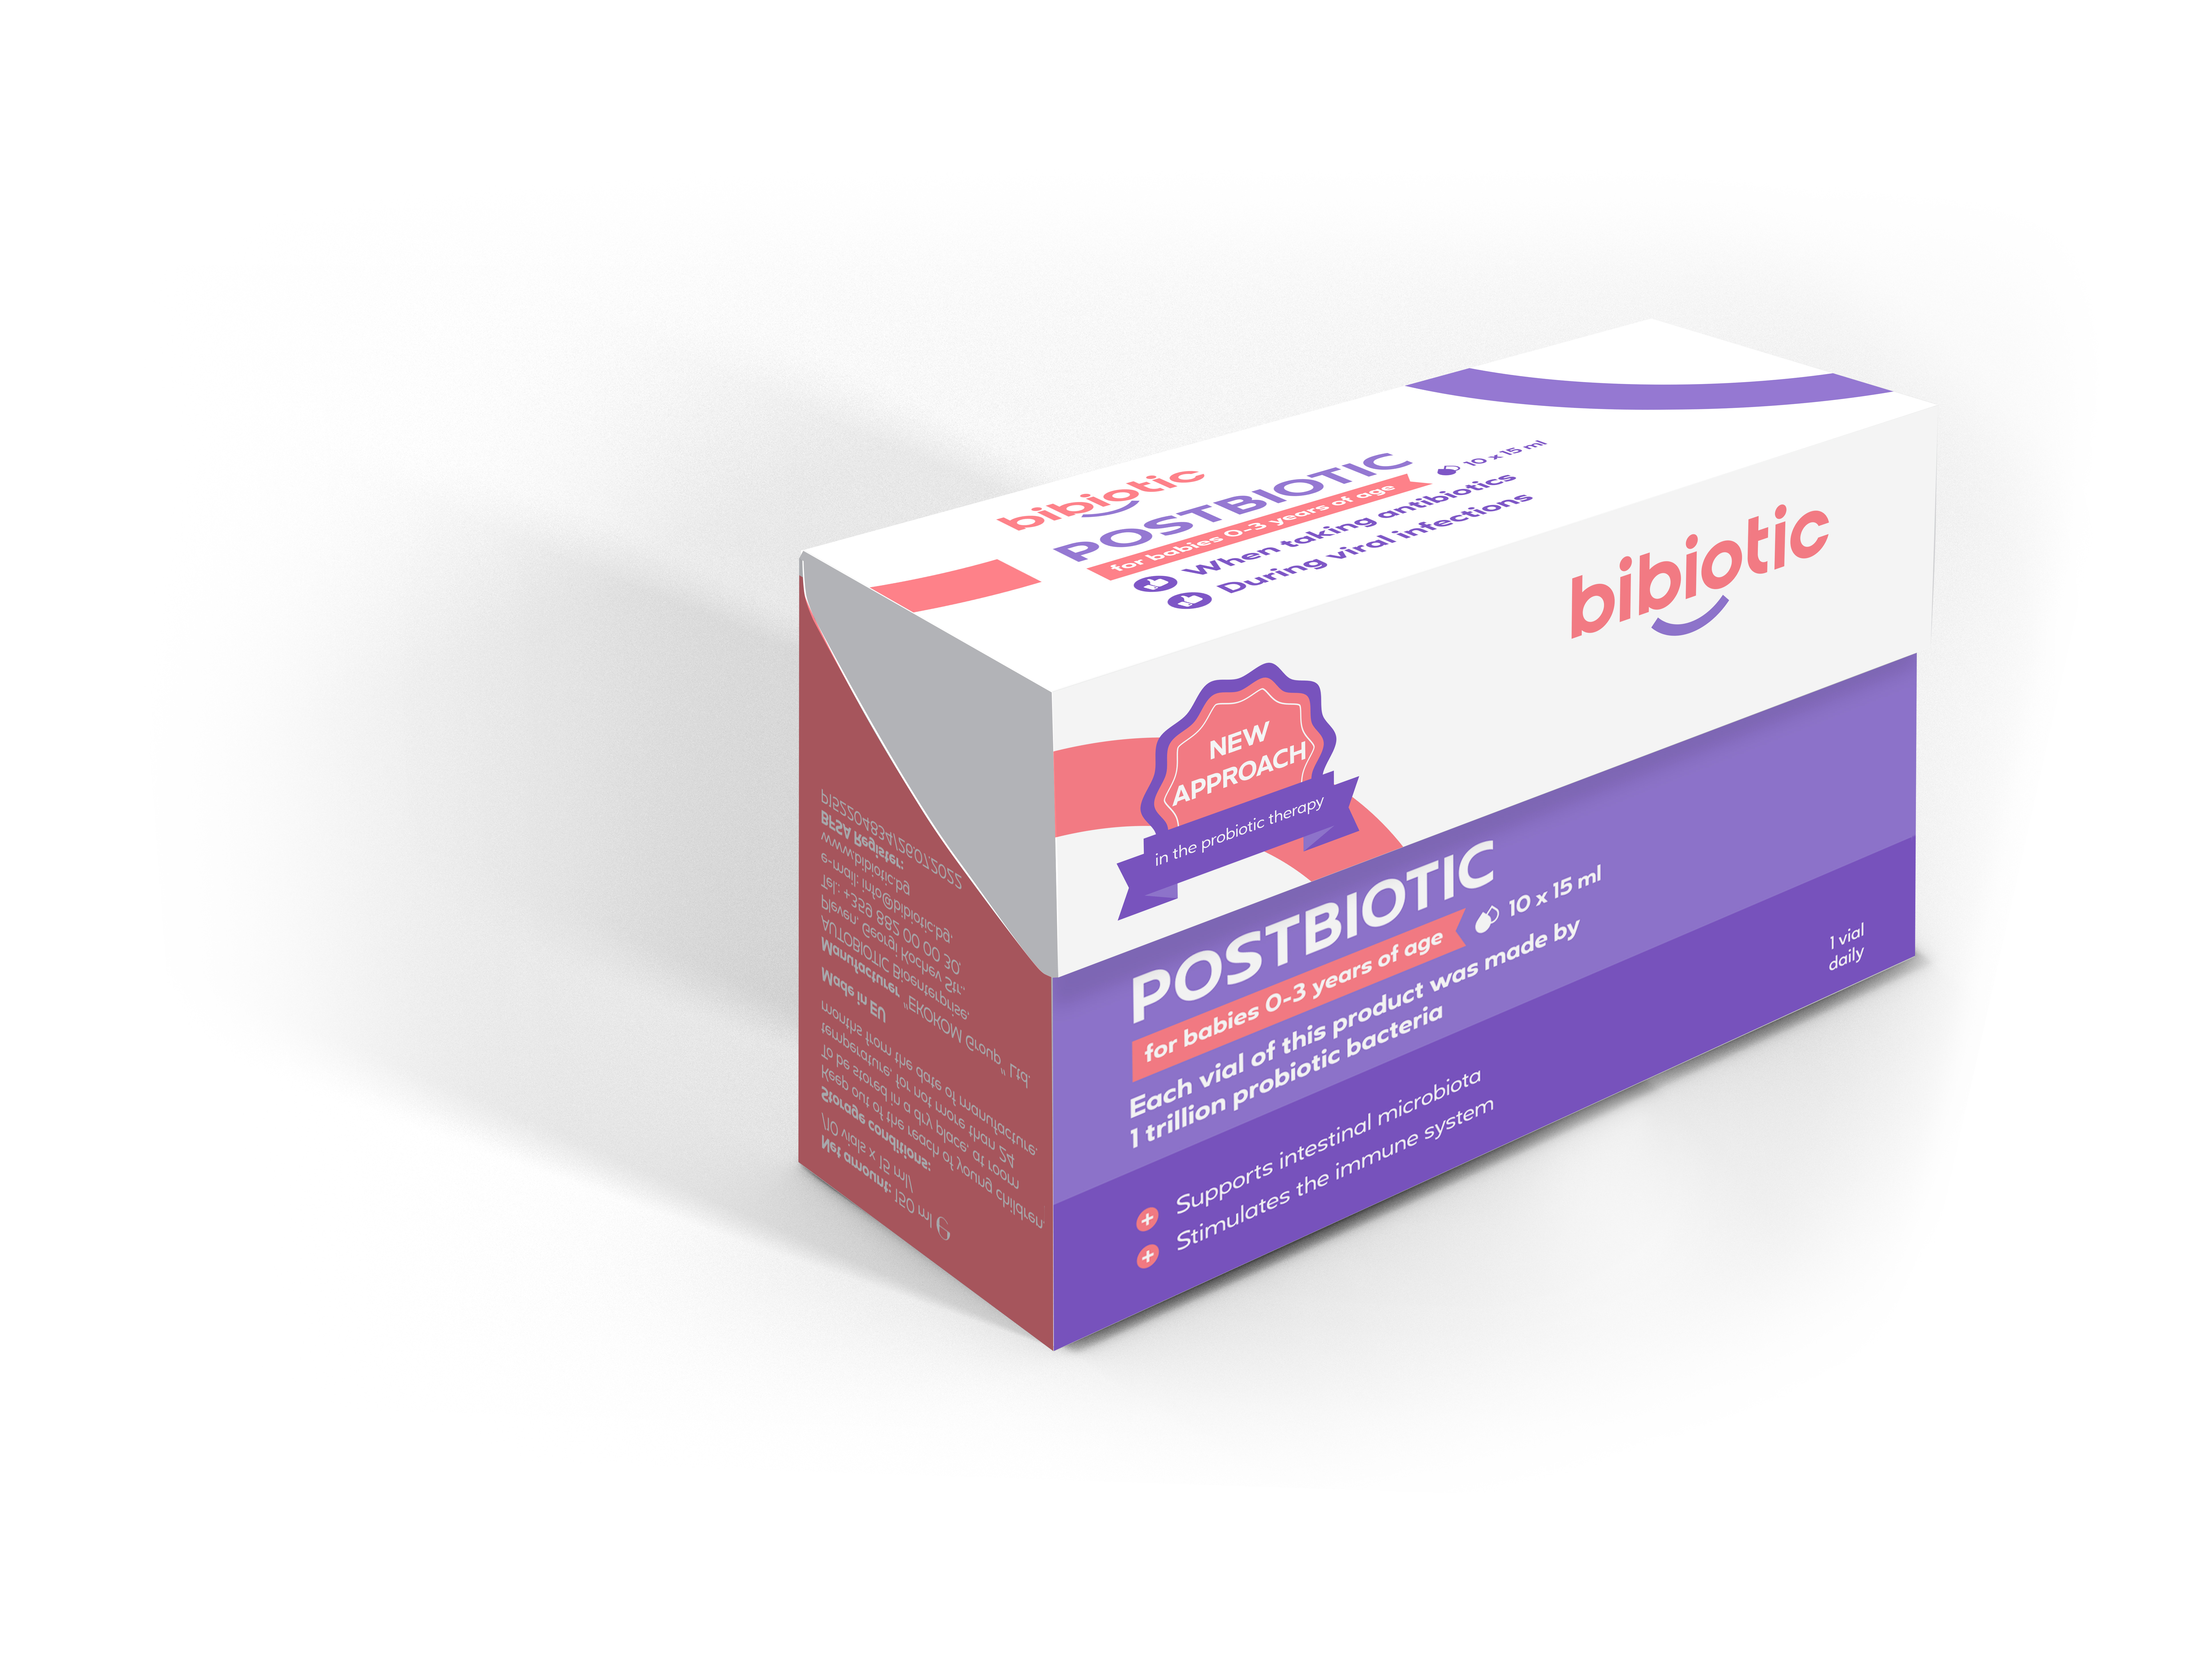 Postbiotic for Babies 0-3 years old